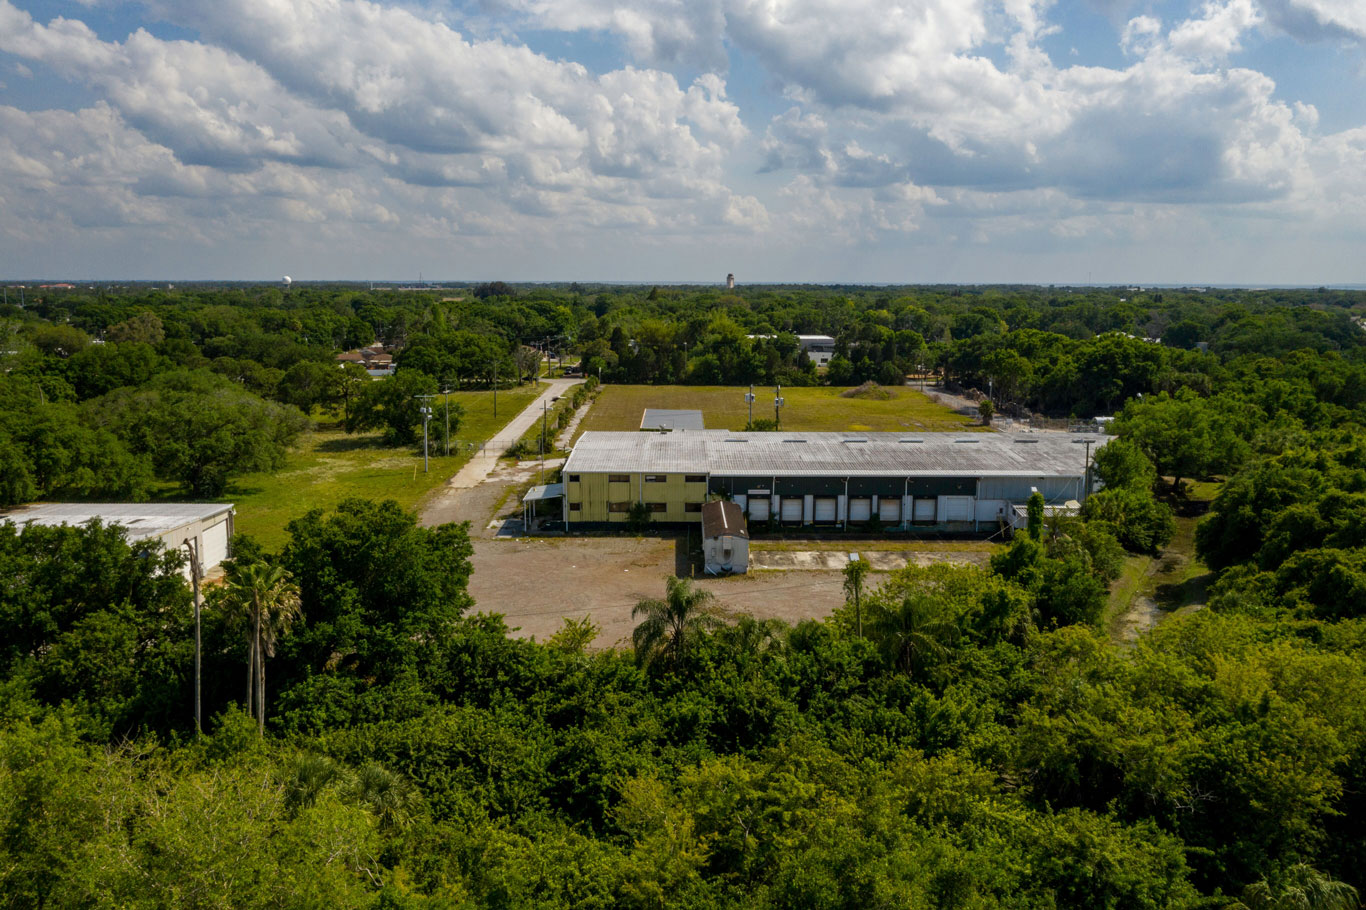 South Tampa Industrial Center.